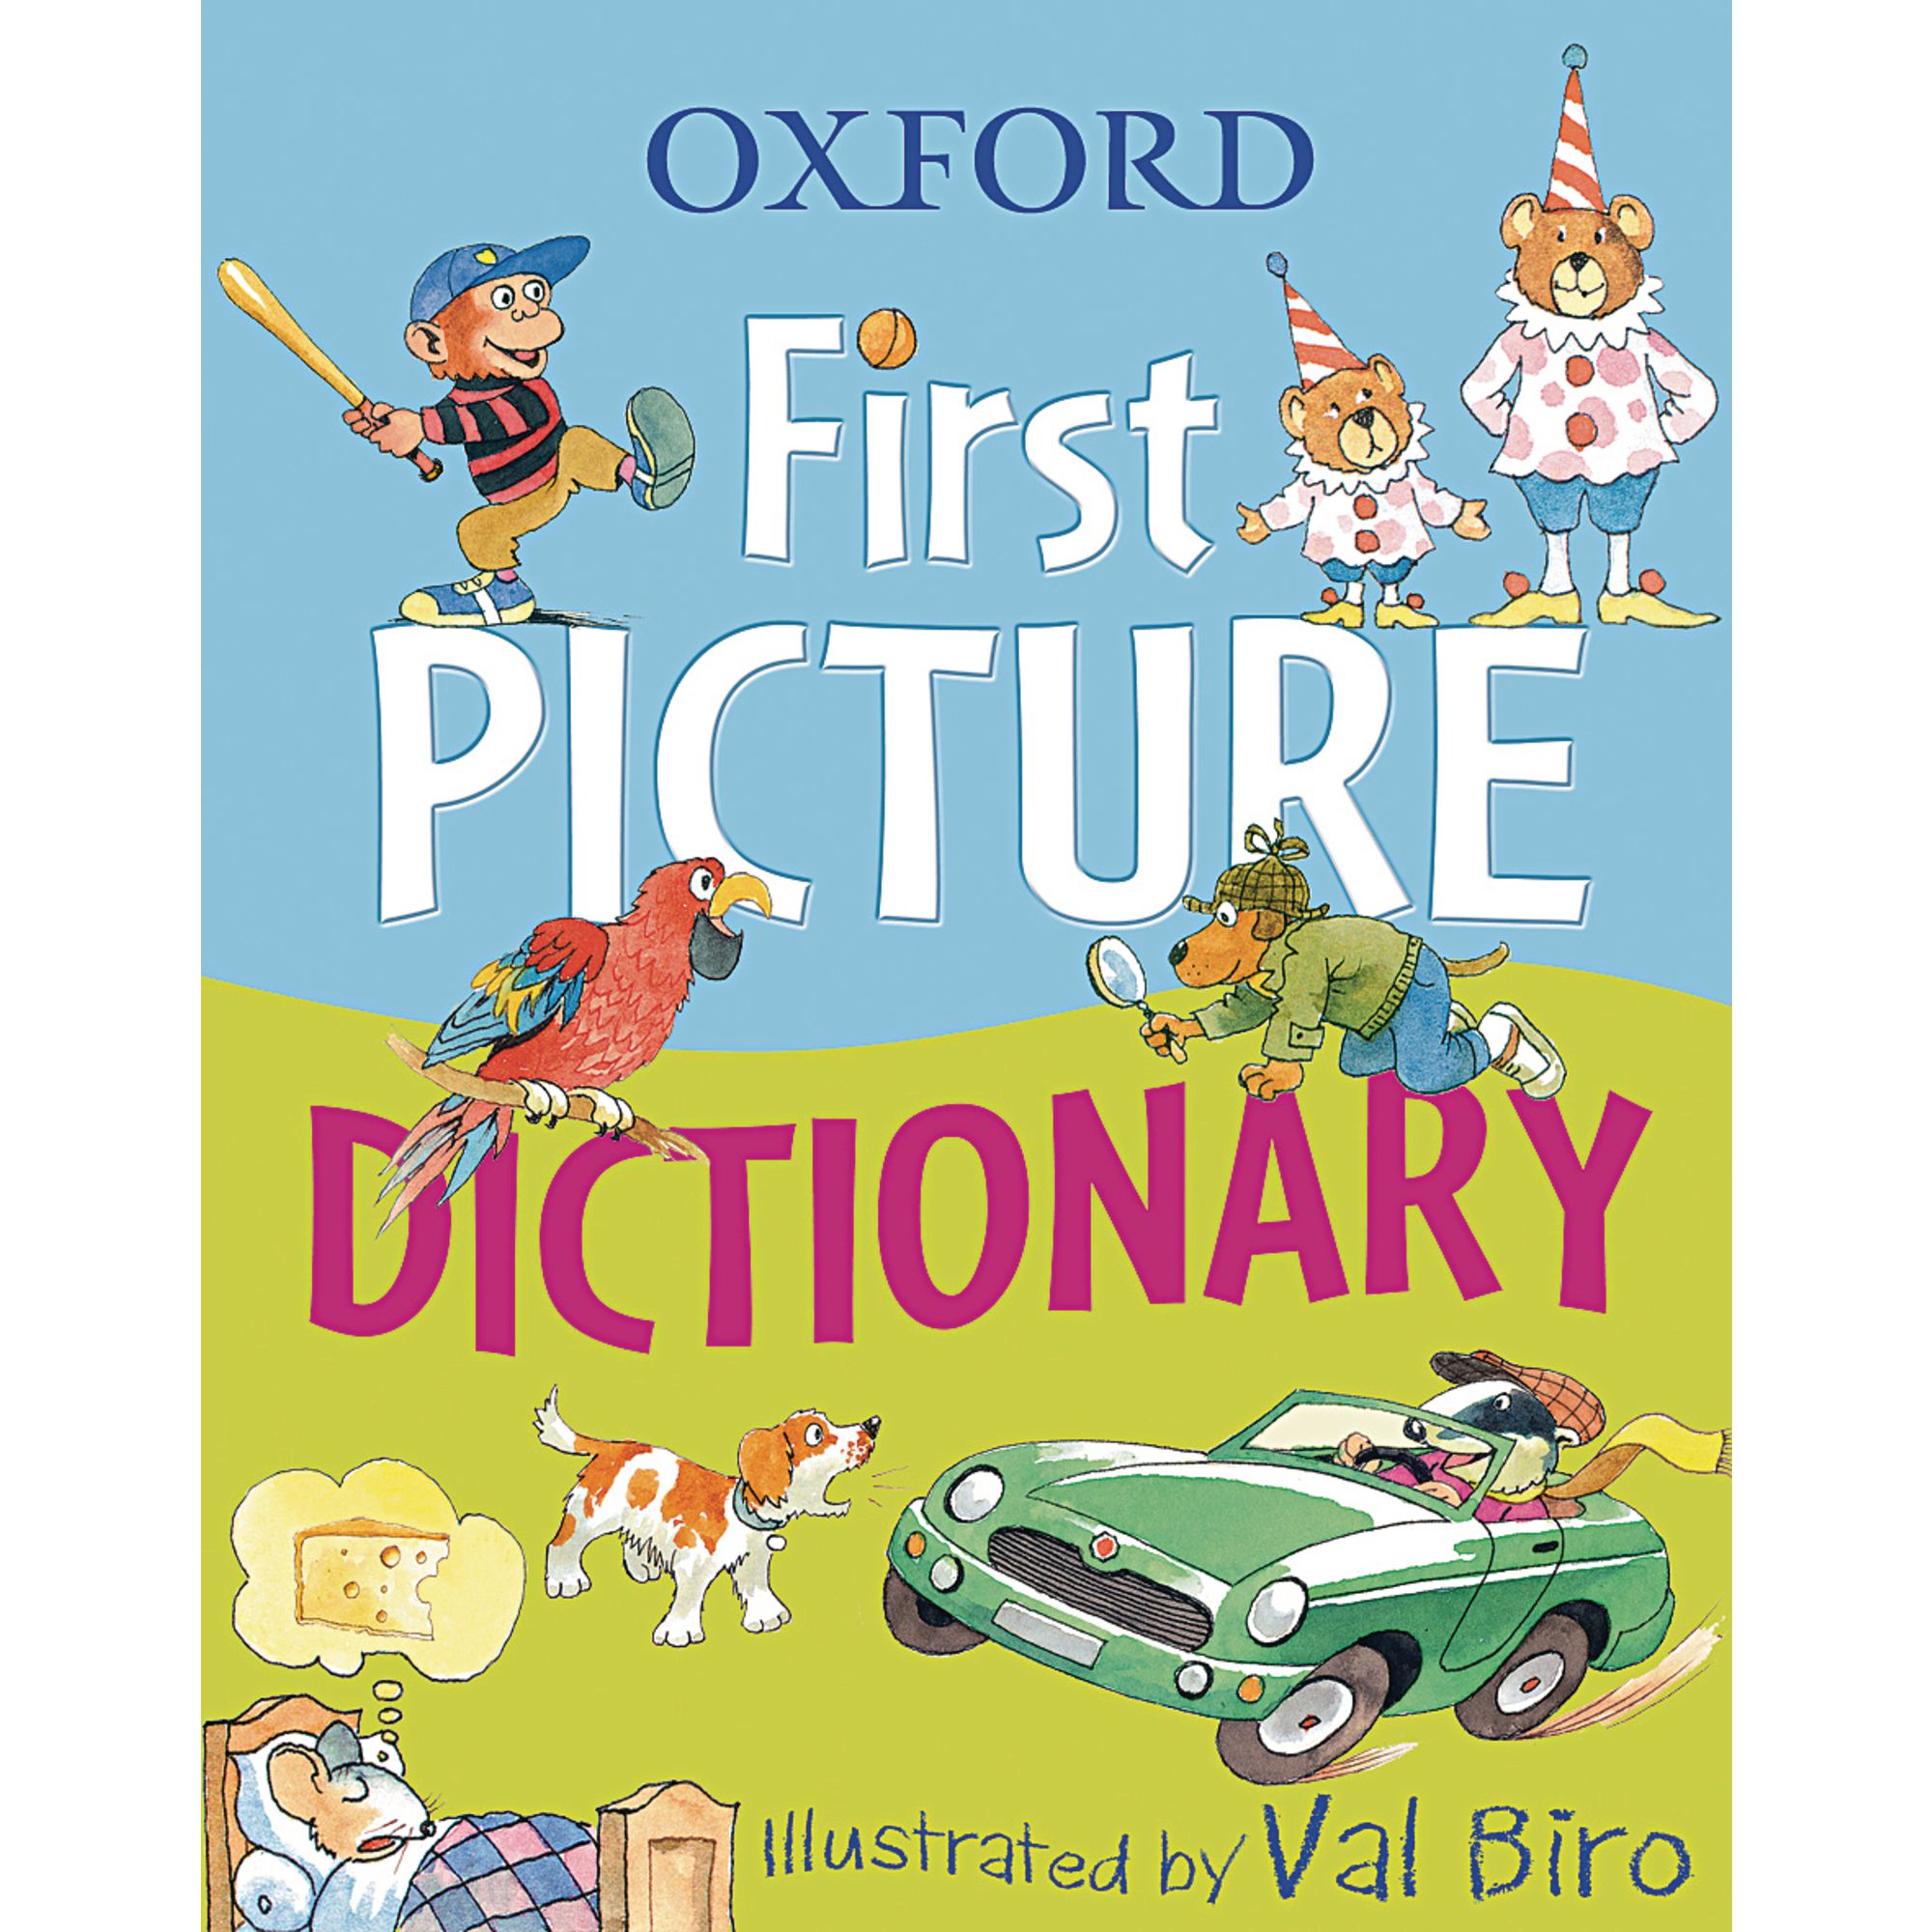 First dictionary. Oxford picture Dictionary. Oxford first Dictionary. Книга Oxford picture Dictionary. Oxford English словарь для детей.